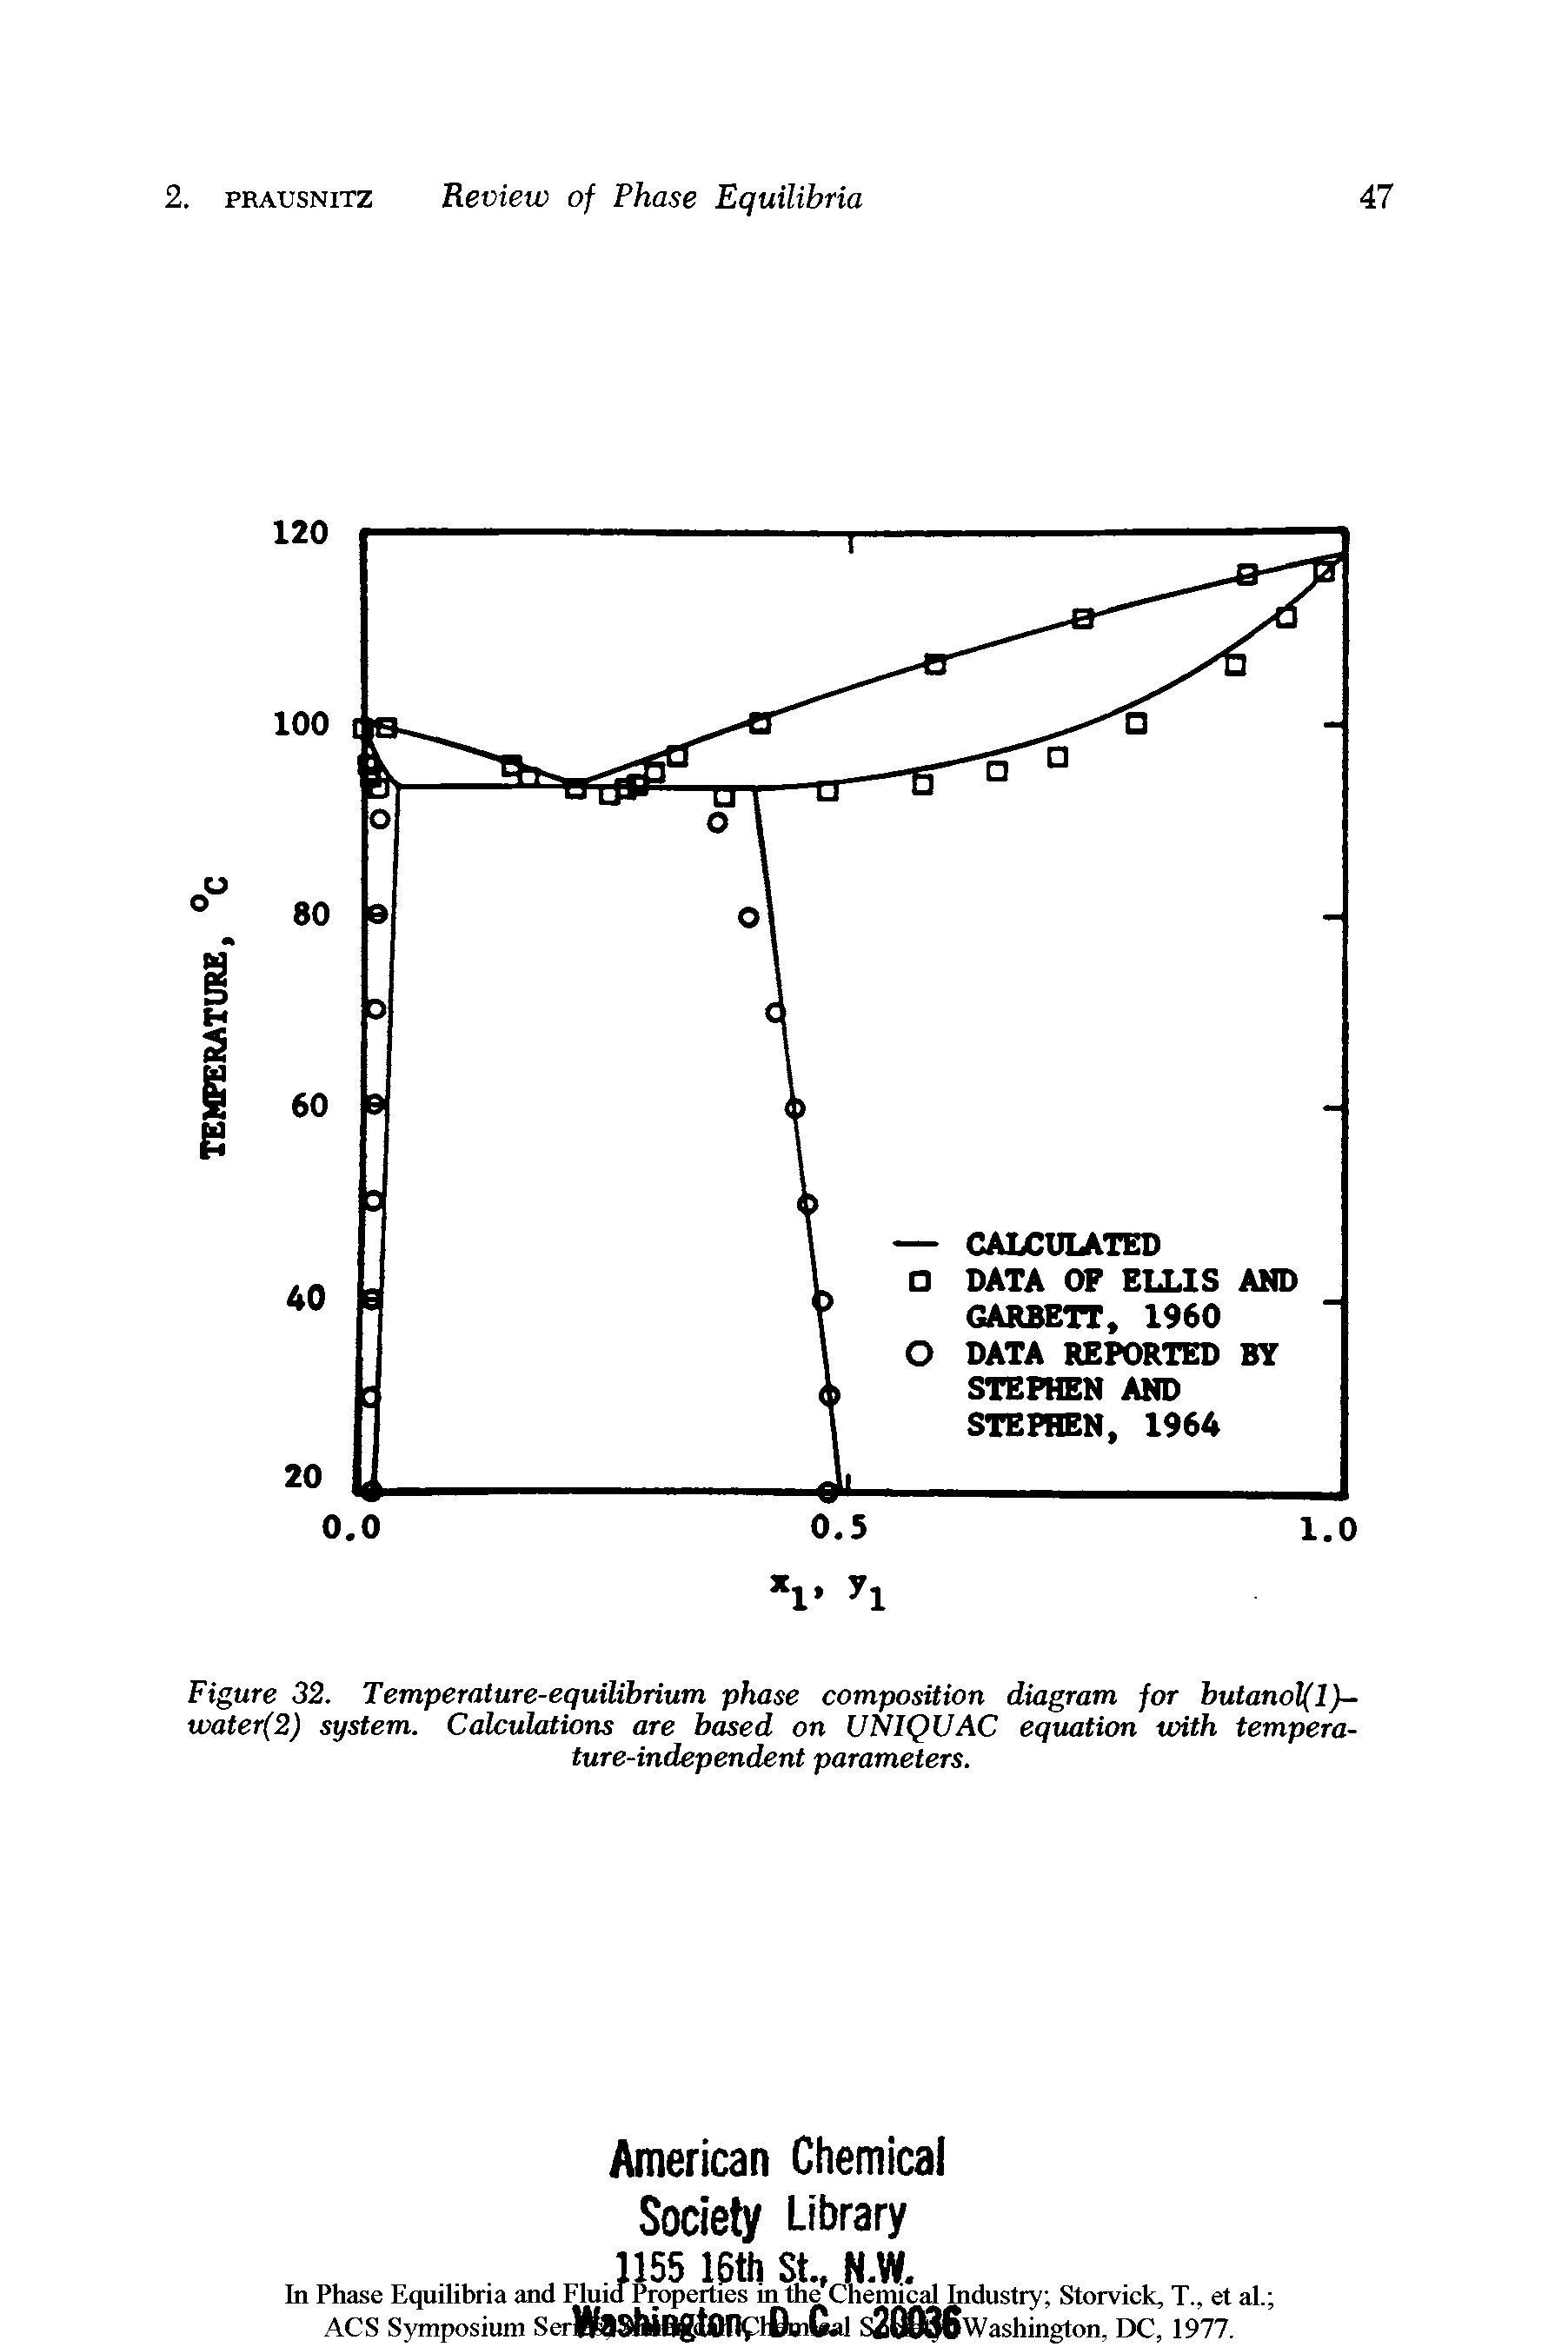 Figure 32. Temperature-equiUbrium phase composition diagram for butanolfl)— water(2) system. Calculations are based on UNIQUAC equation with temperature-independent parameters.